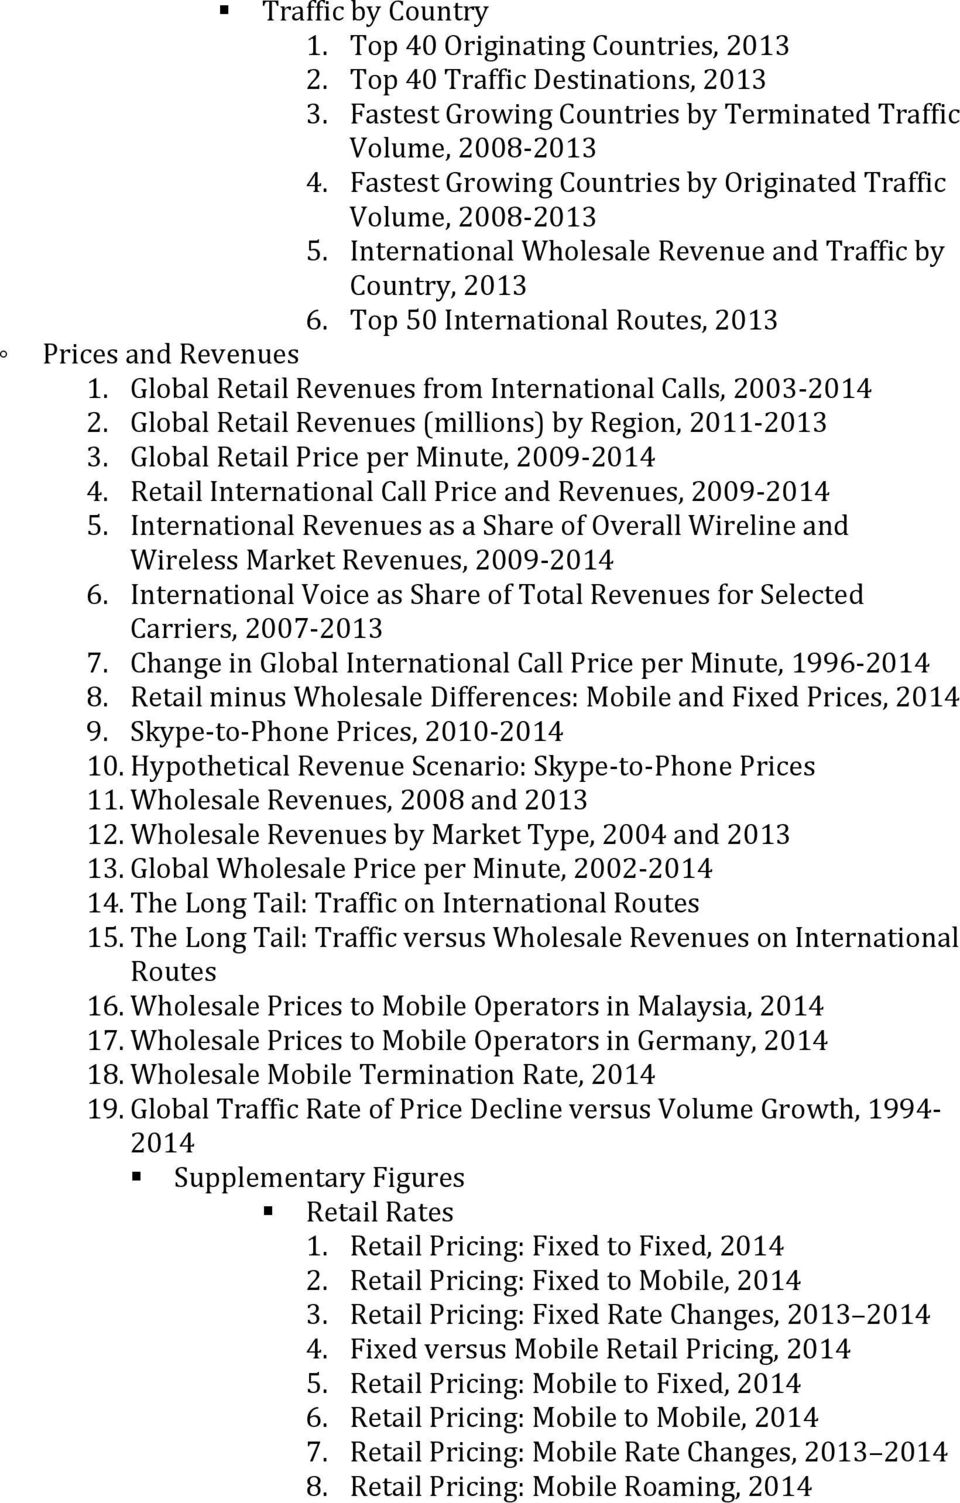 Global Retail Revenues from International Calls, 2003-2014 2. Global Retail Revenues (millions) by Region, 2011-3. Global Retail Price per Minute, 2009-2014 4.